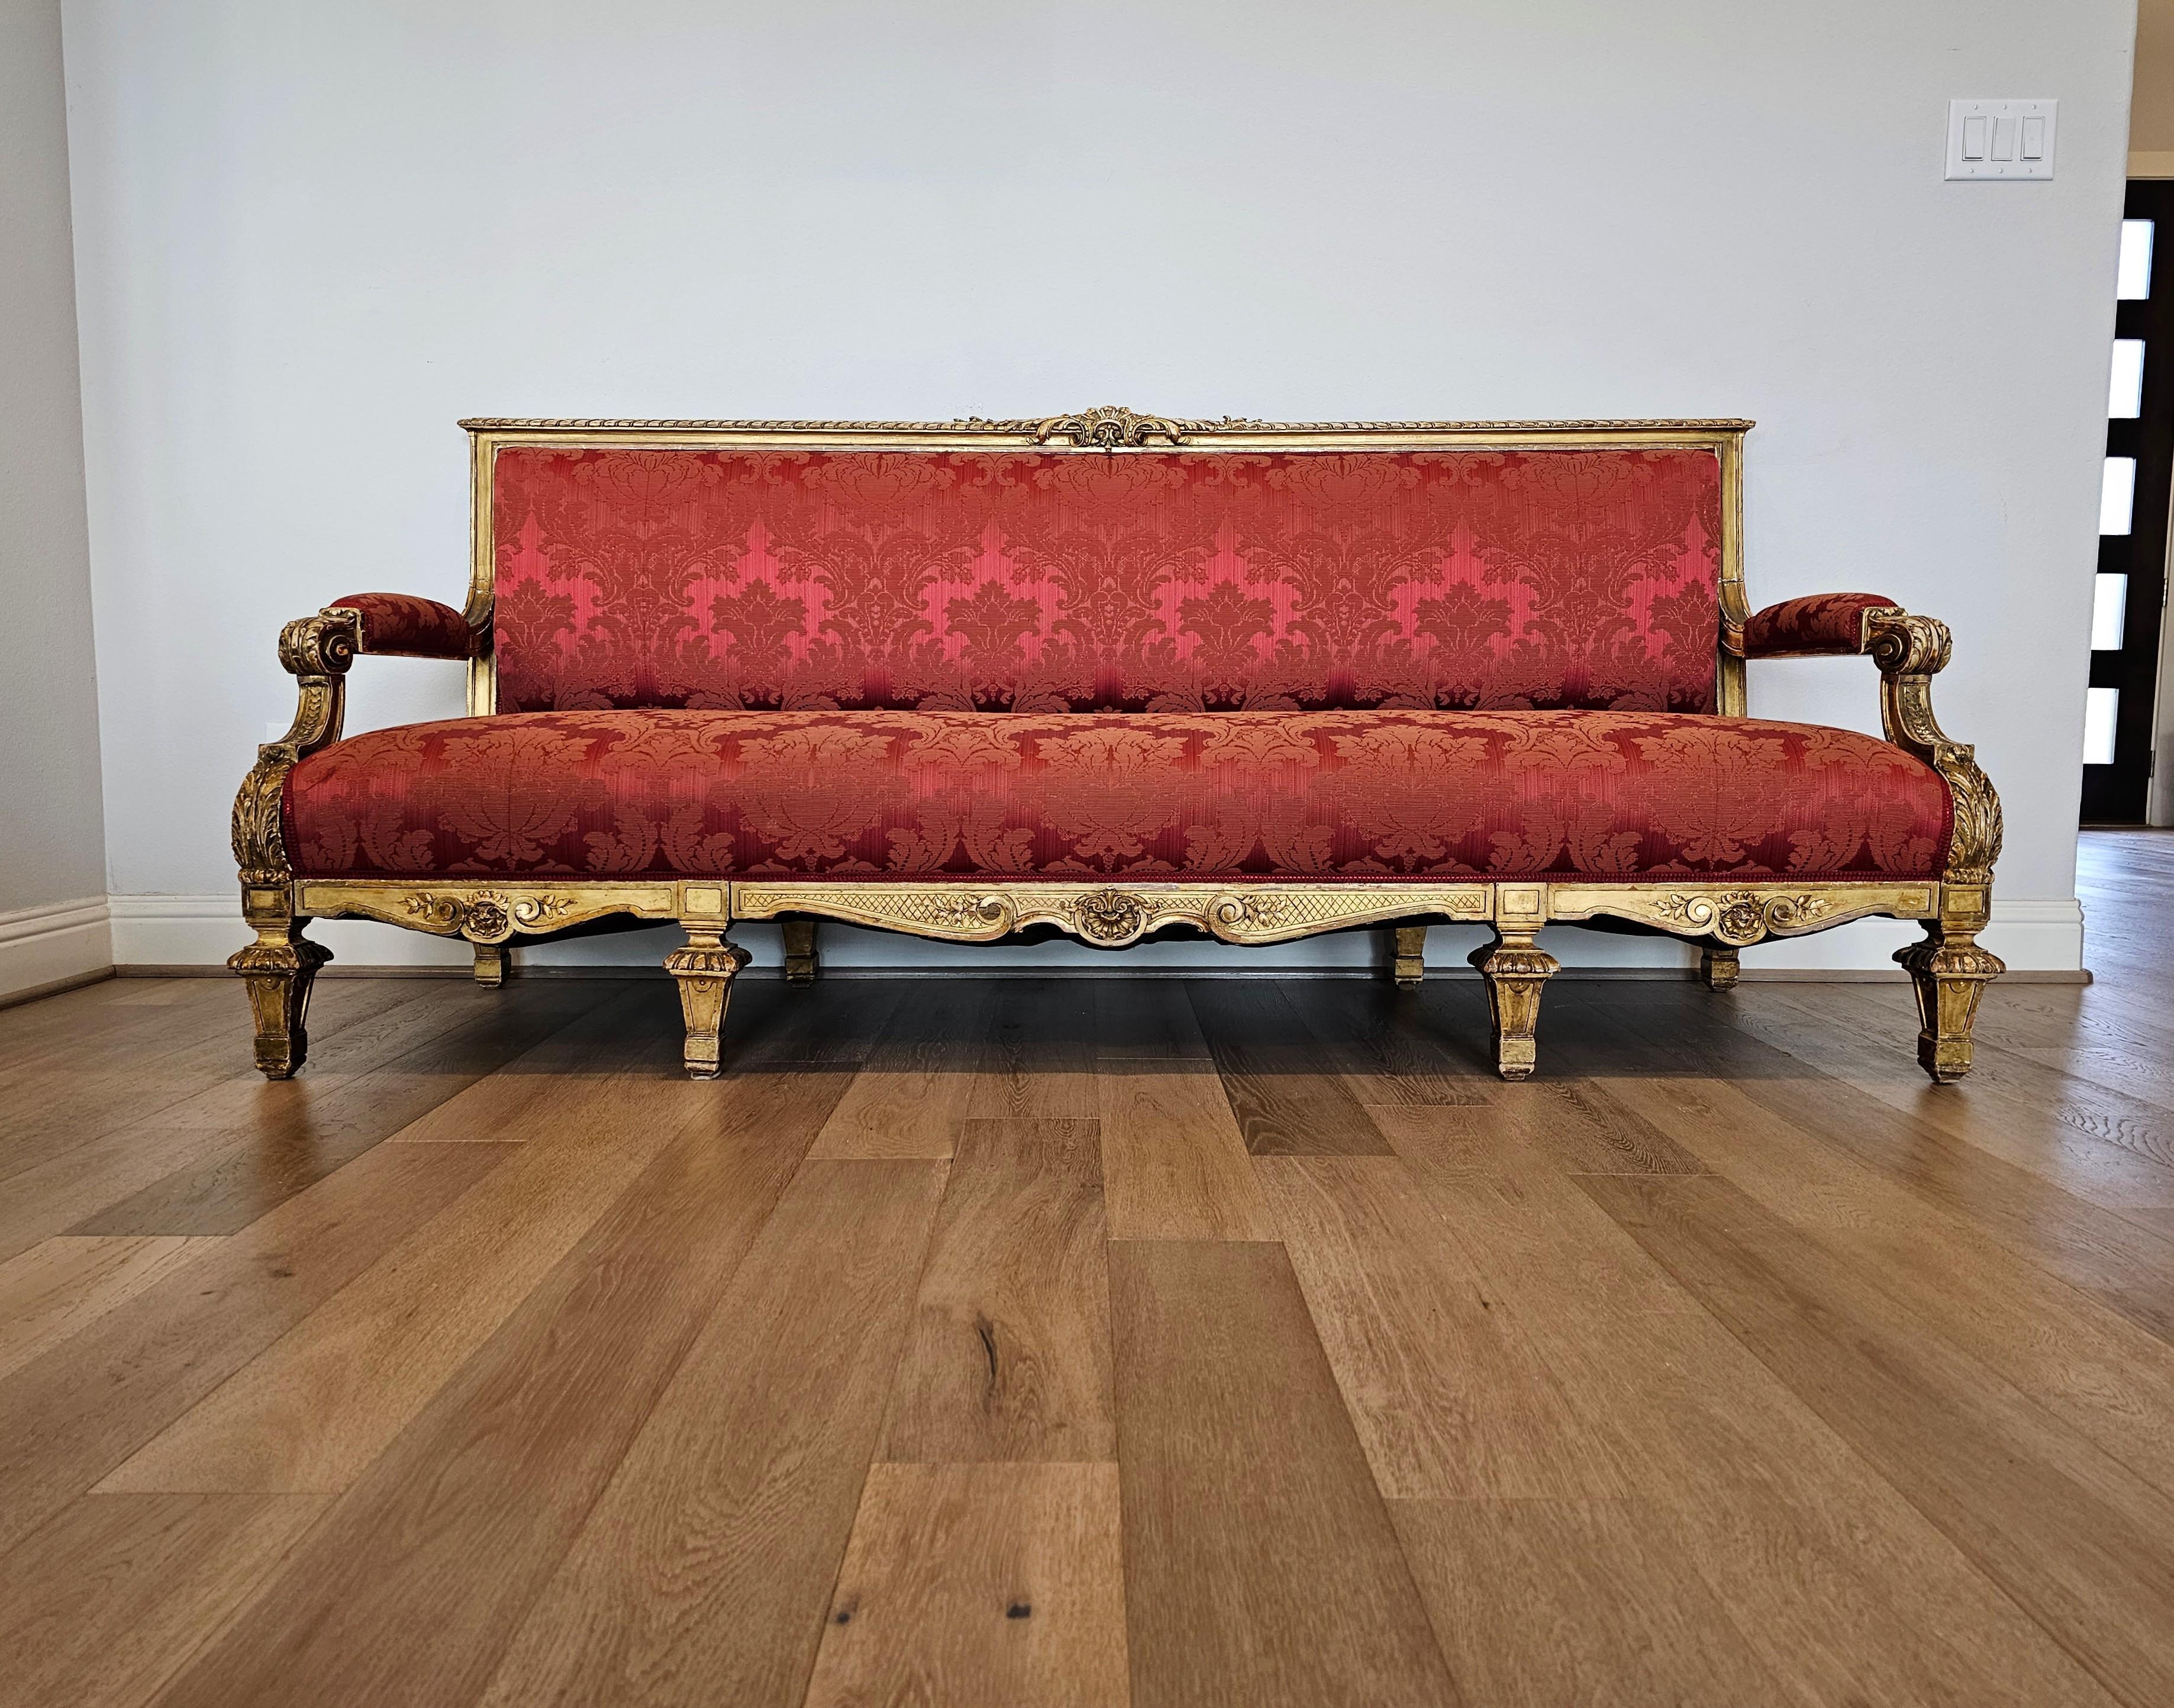 Antique French Louis XVI Style Giltwood Damask Upholstered Long Sofa Set For Sale 8